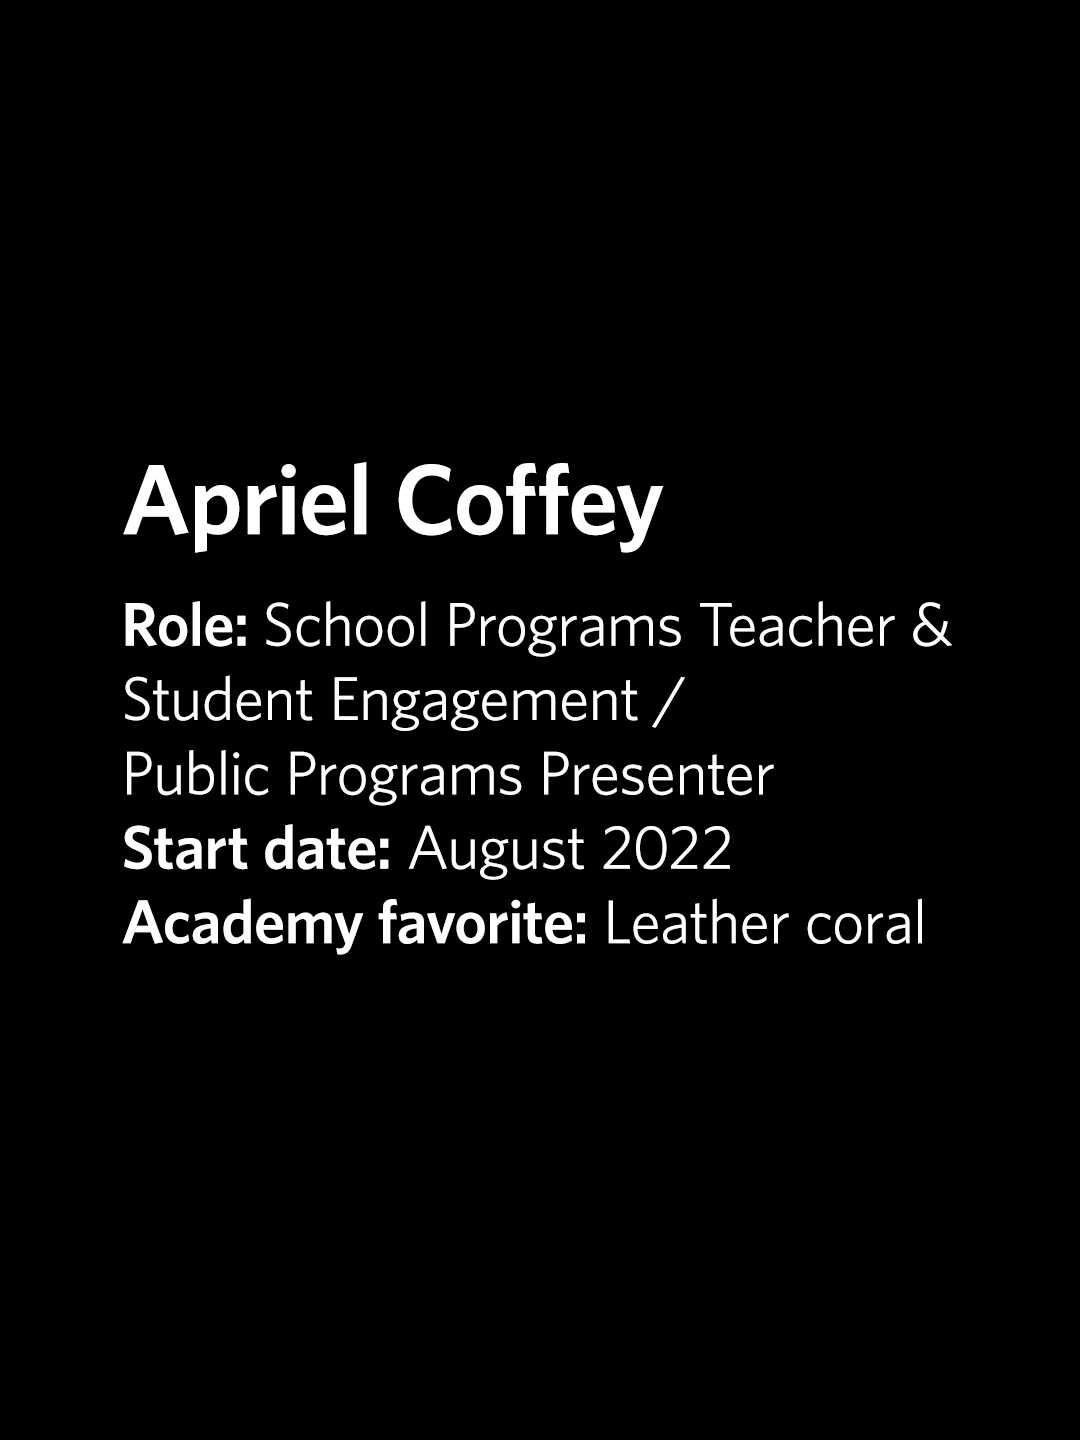 Apriel Coffey, School Programs Teacher/Presenter at the Academy, started August 2022, favorite exhibit is leather coral